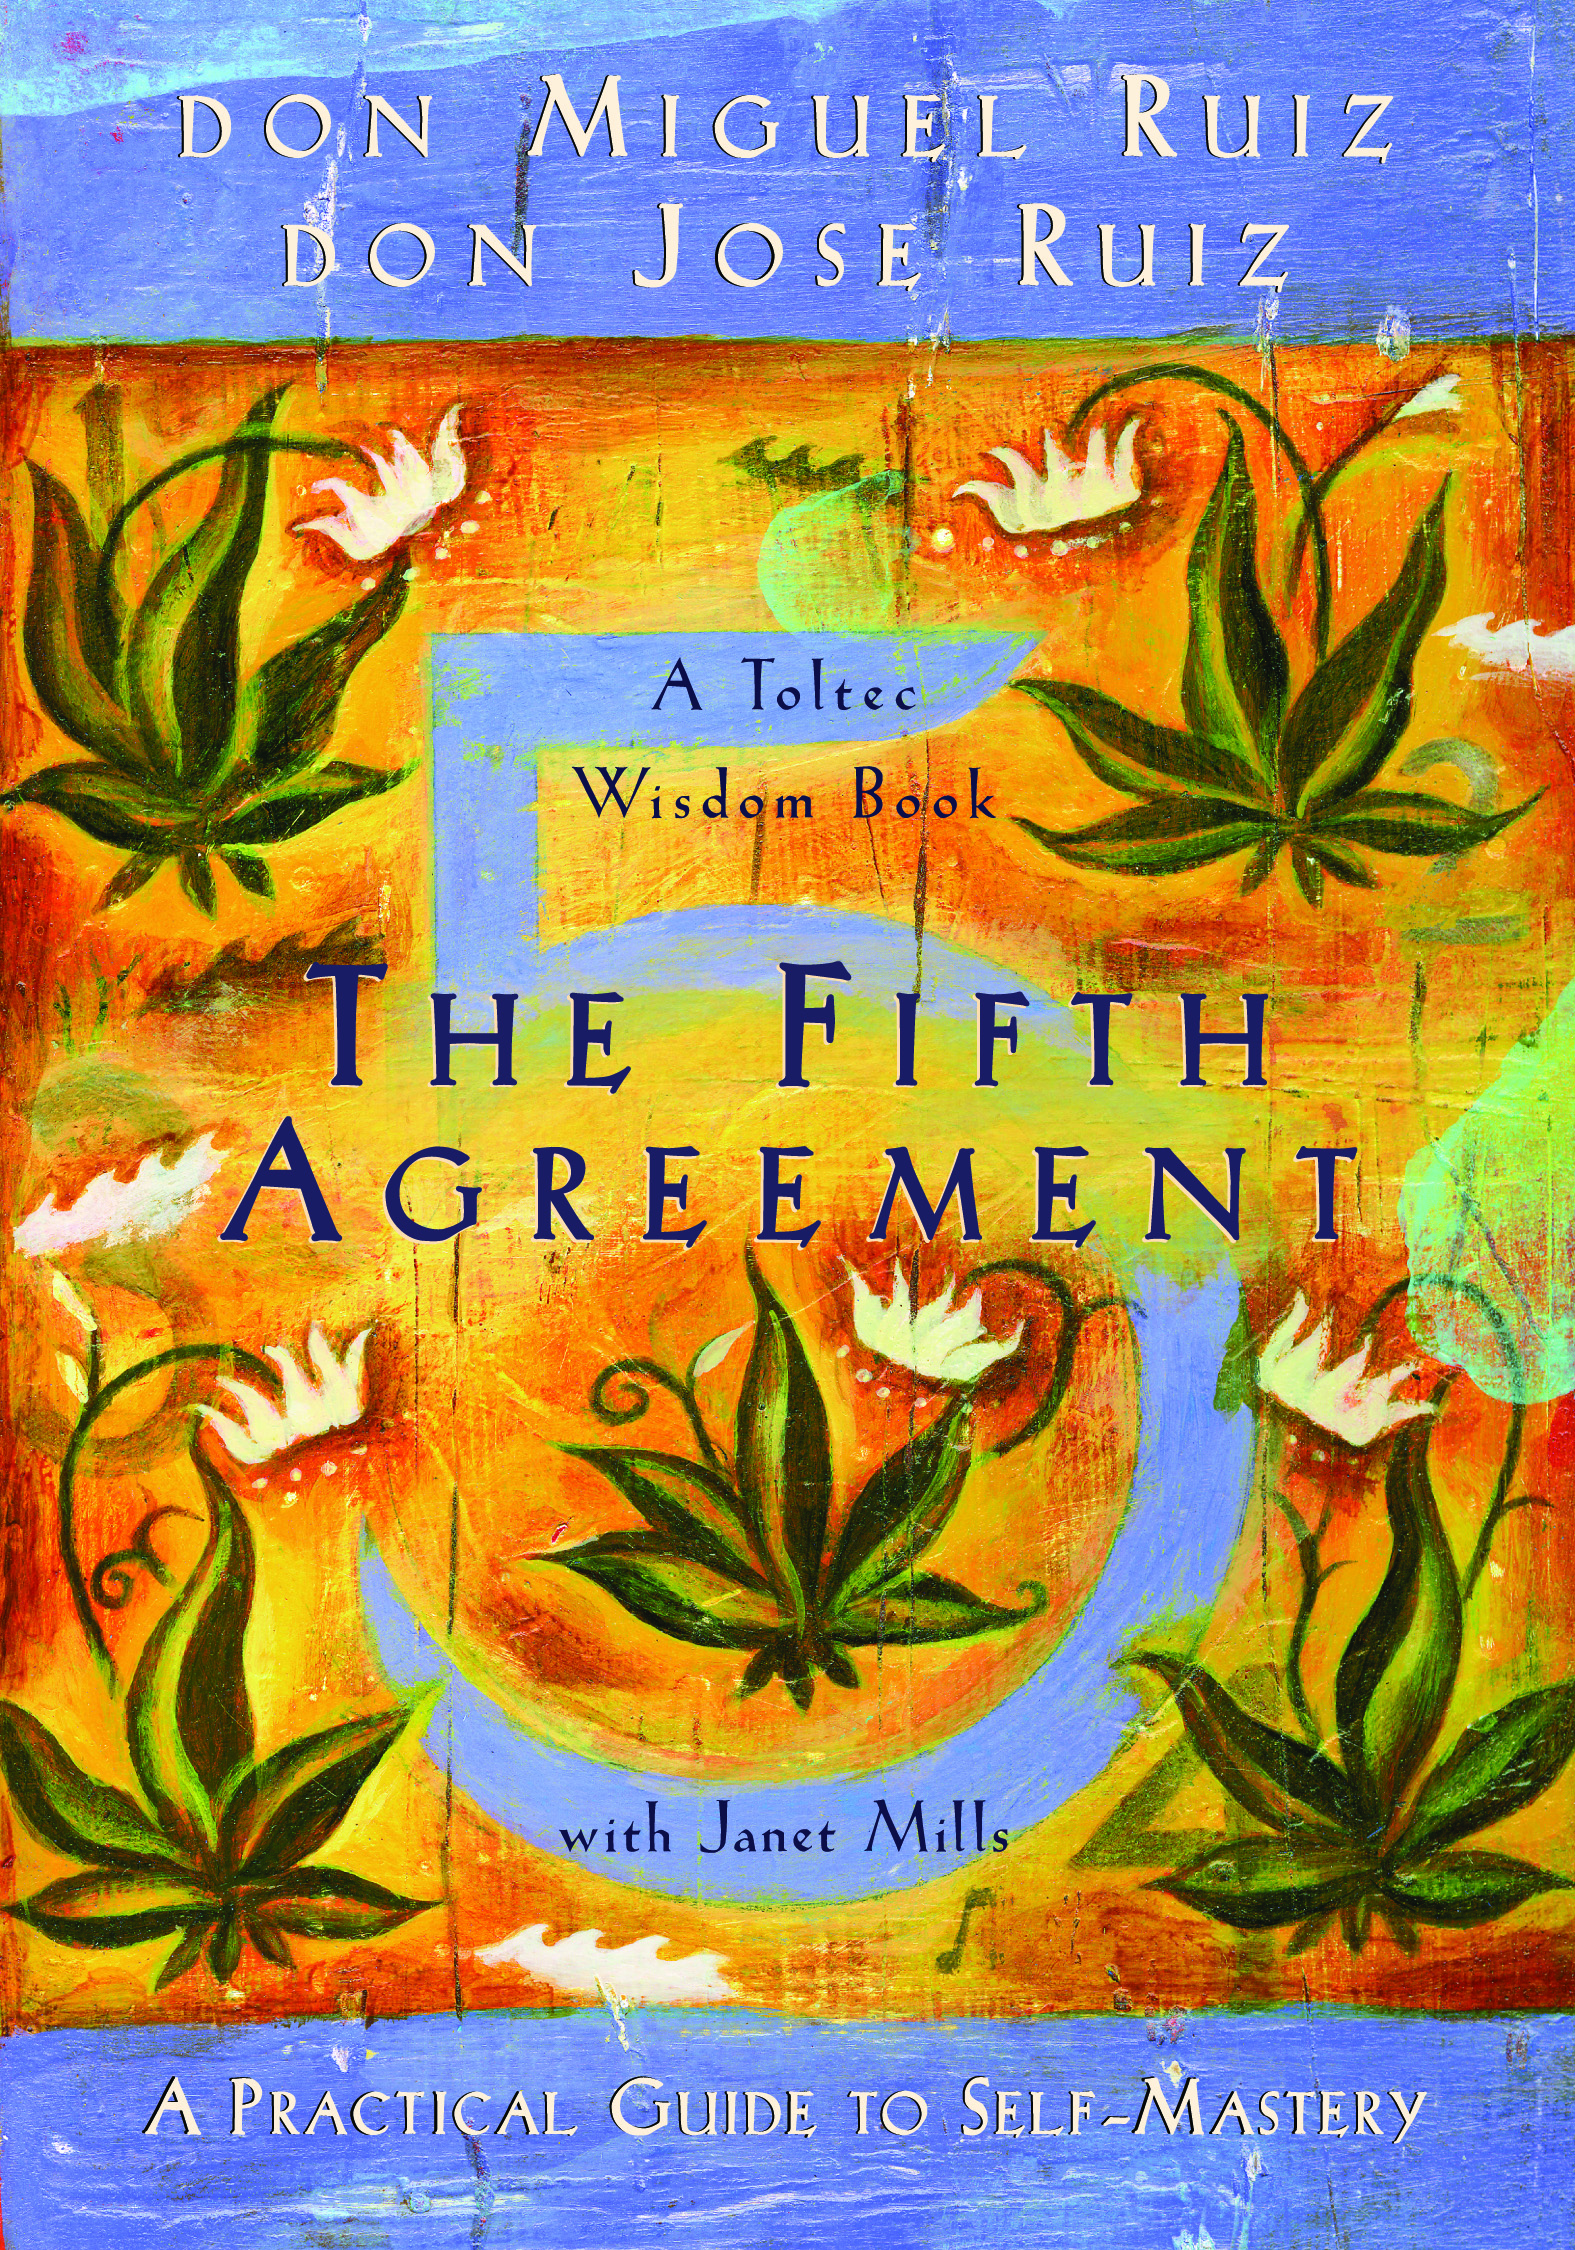 Amber Allen Publishing | An Interview with don Miguel Ruiz and don 